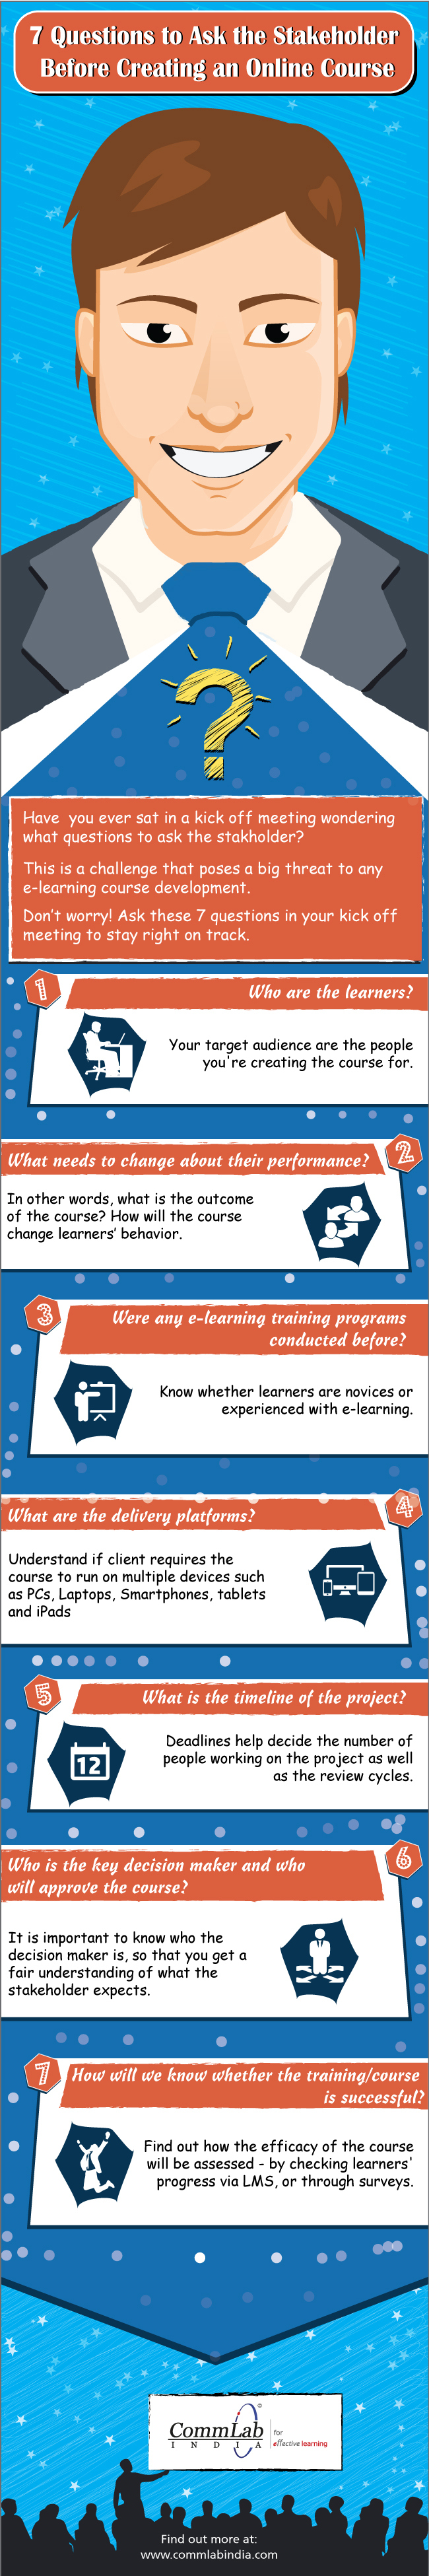 questions-to-ask-the-elearning-stakeholders-infographic